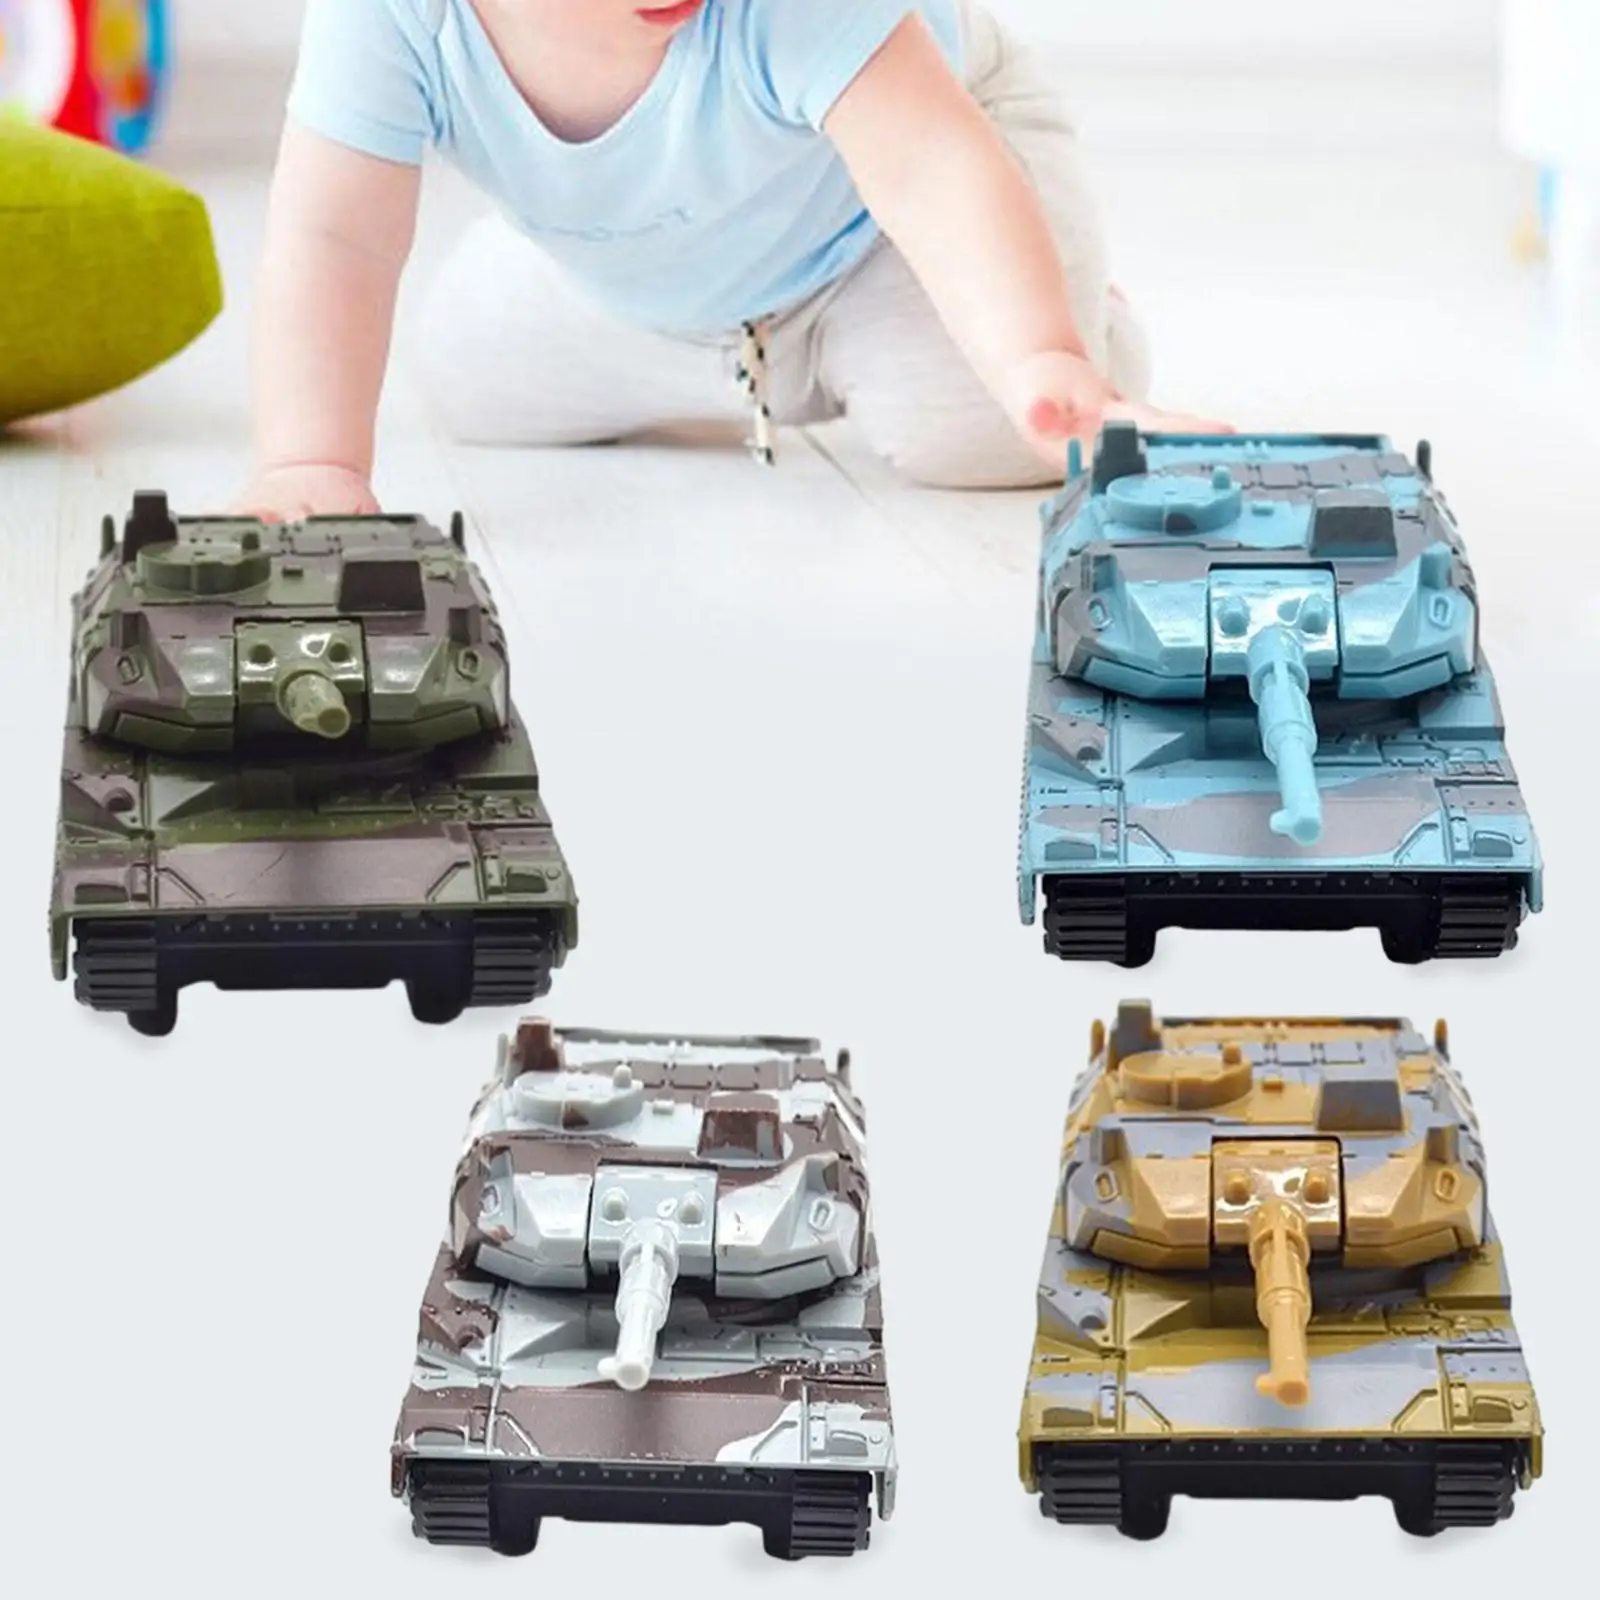 4 Pieces Pull Back Tank Model Toy Alloy Realistic Portable Party Favors Vehicle Kids Tank for Kids Girls Boys Children Gift